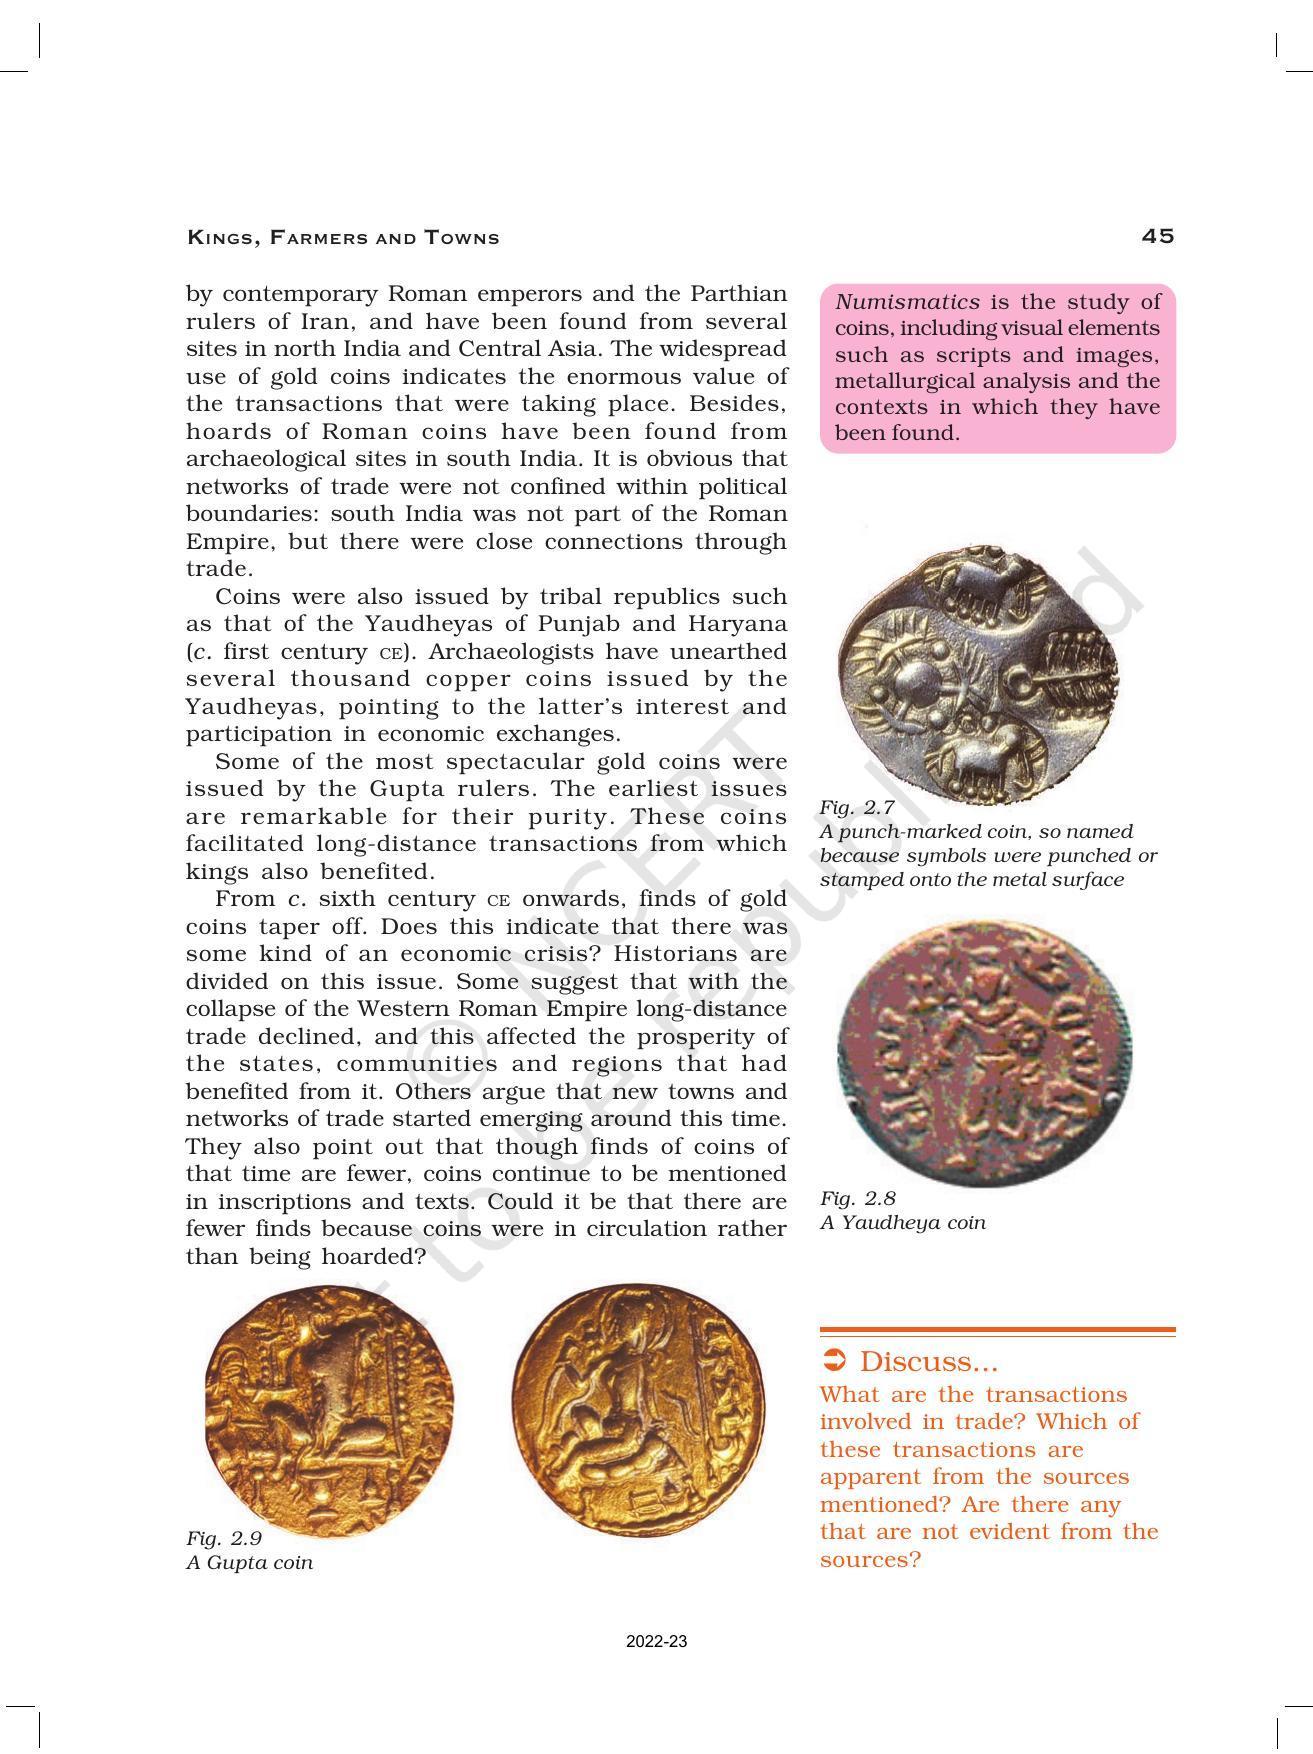 NCERT Book for Class 12 History (Part-1) Chapter 2 Kings, Farmers, and Towns - Page 18